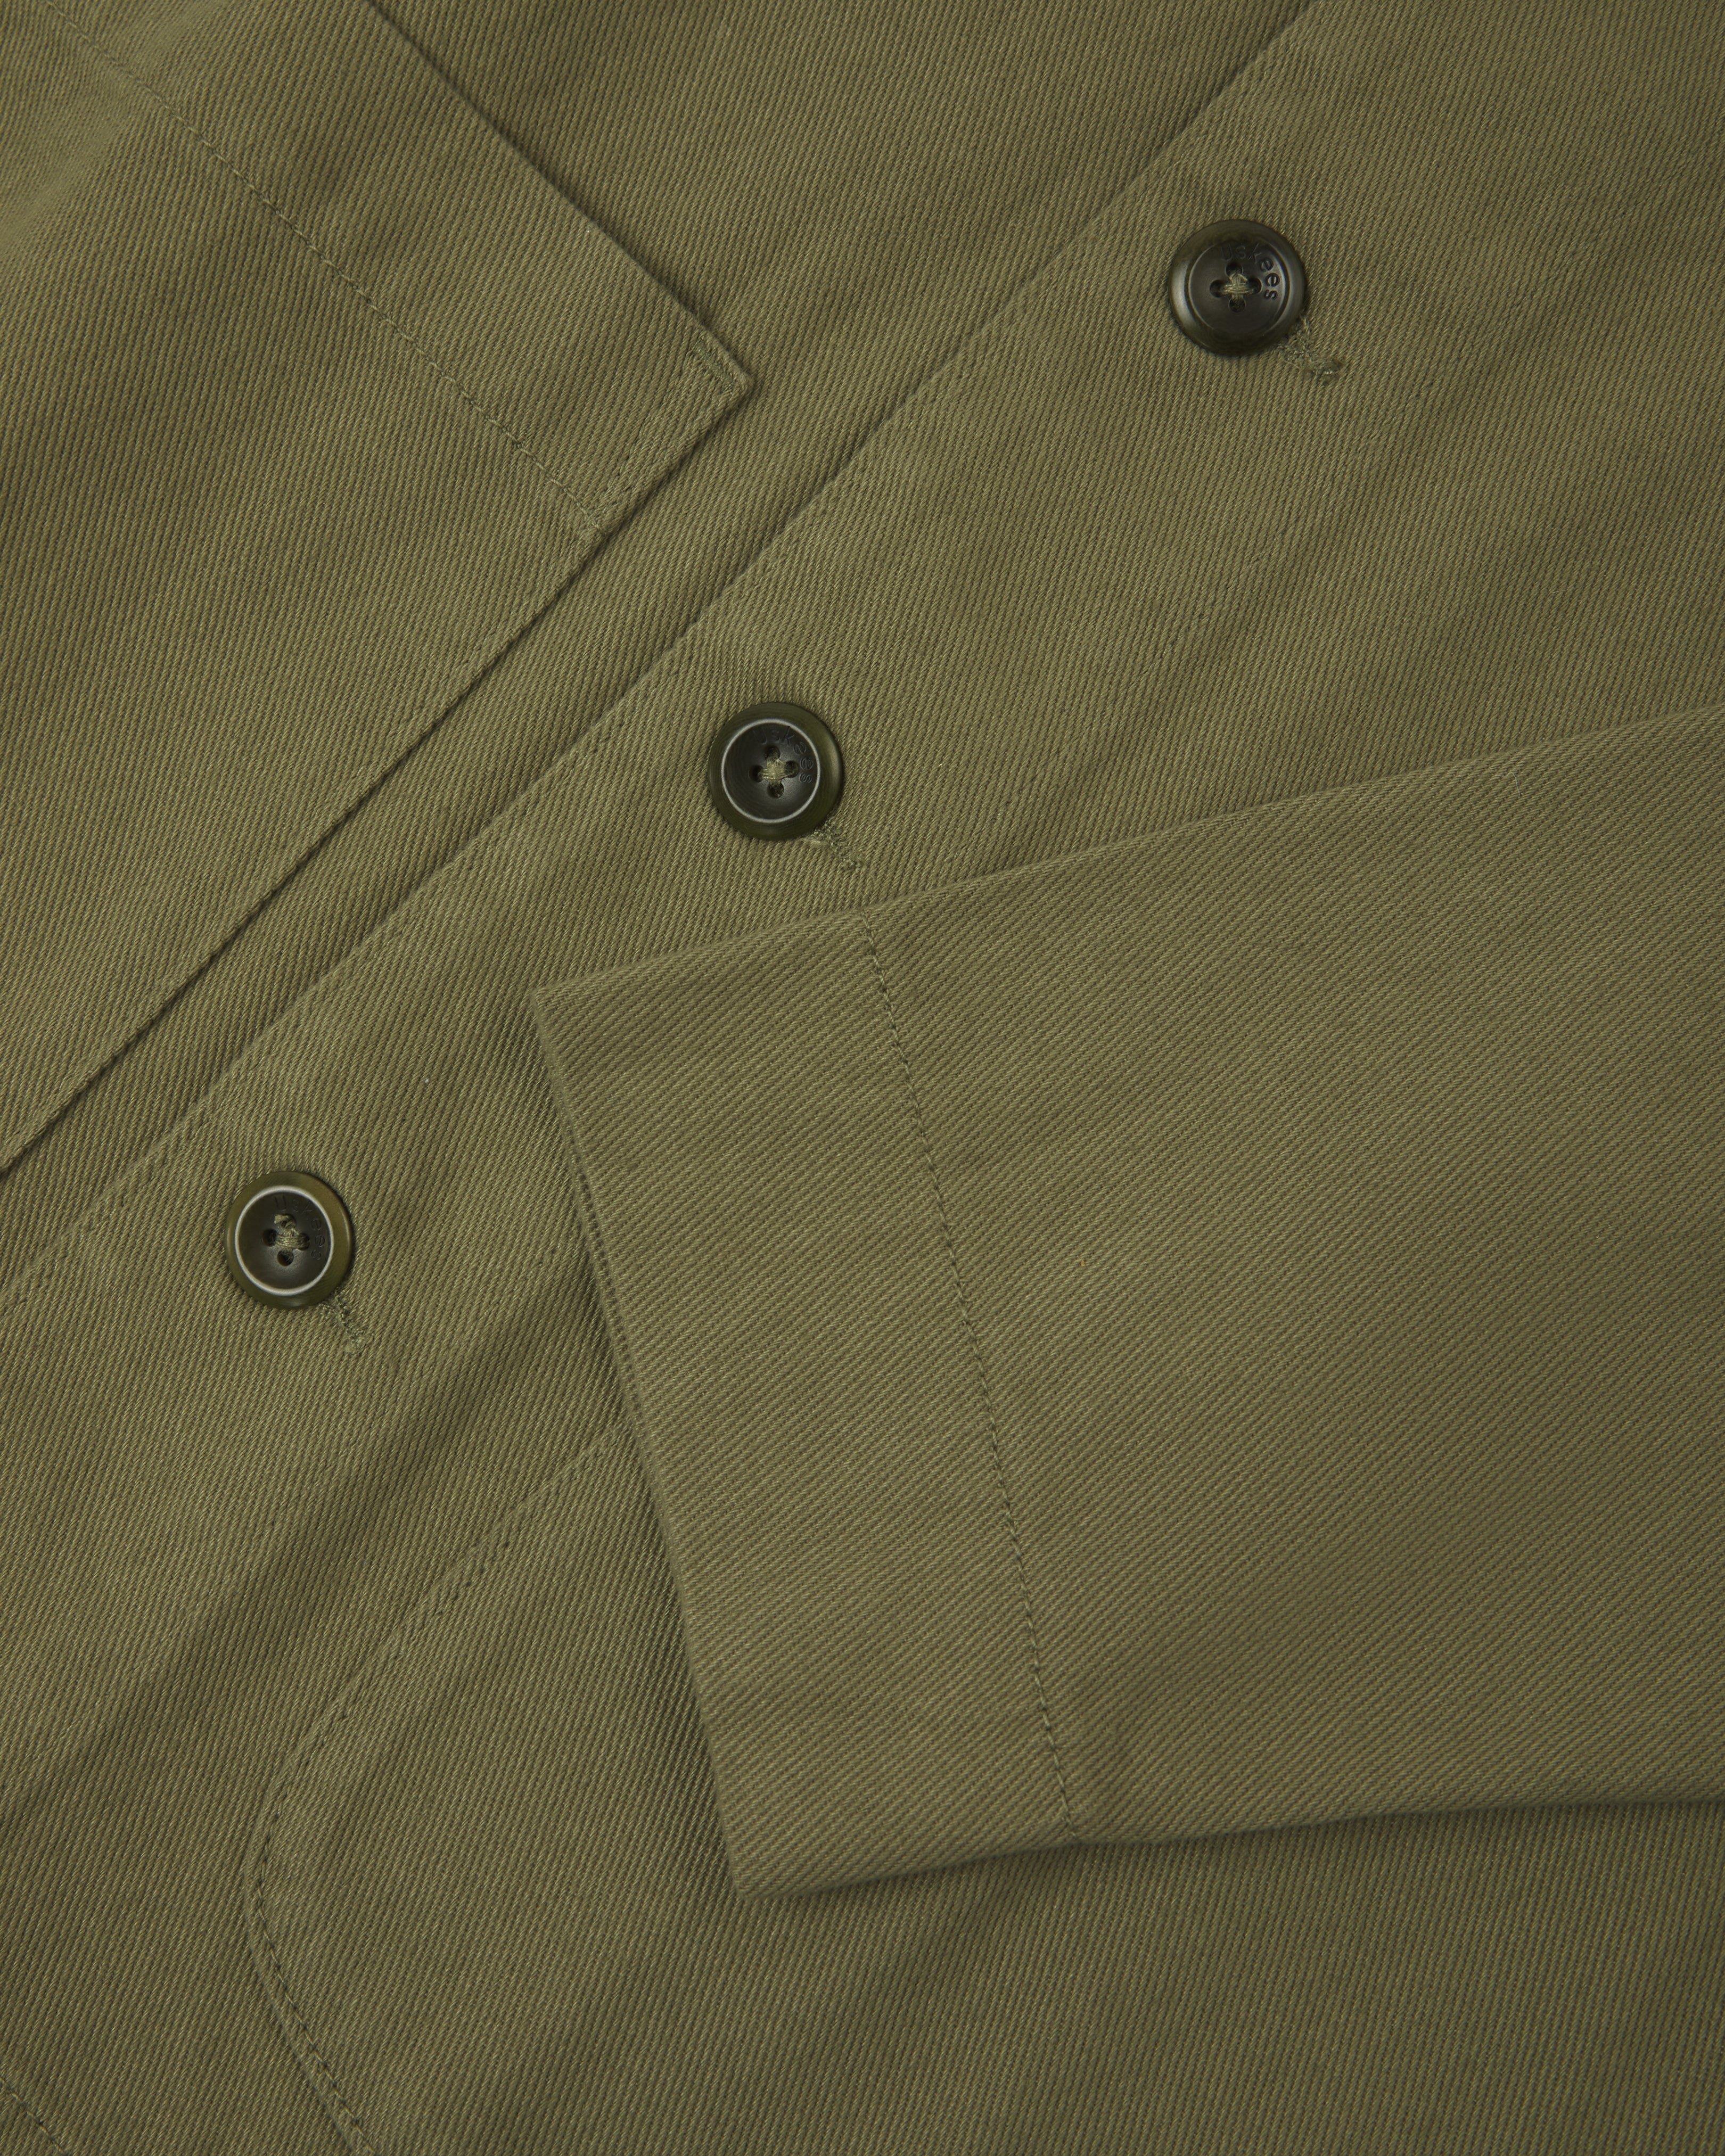 Front close view of moss green organic cotton drill commuter blazer showing cuff/sleeve, corozo buttons &  patch pocket